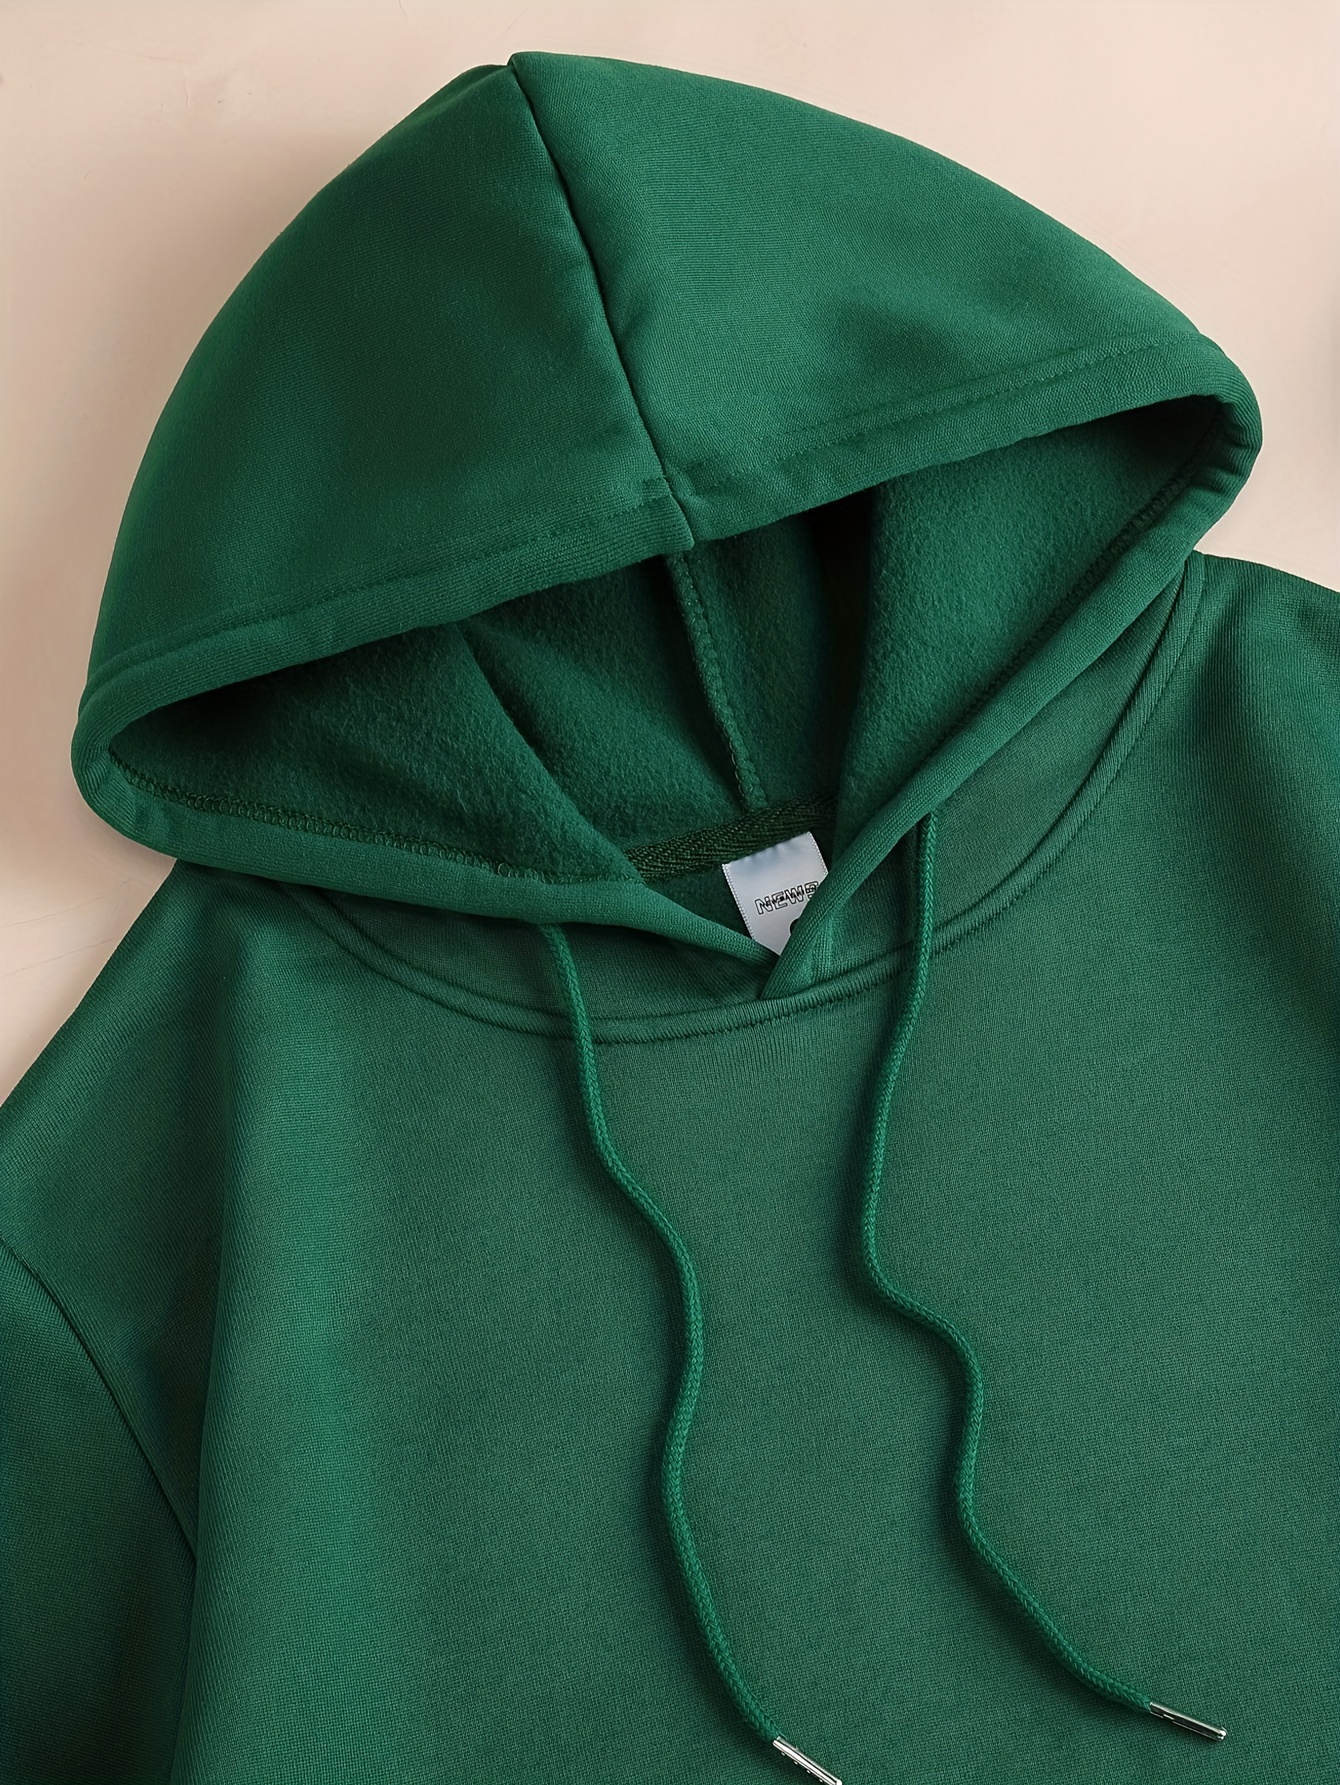 solid color hoodies for men hoodie with kangaroo pocket comfy loose trendy hooded pullover mens clothing for autumn winter details 15